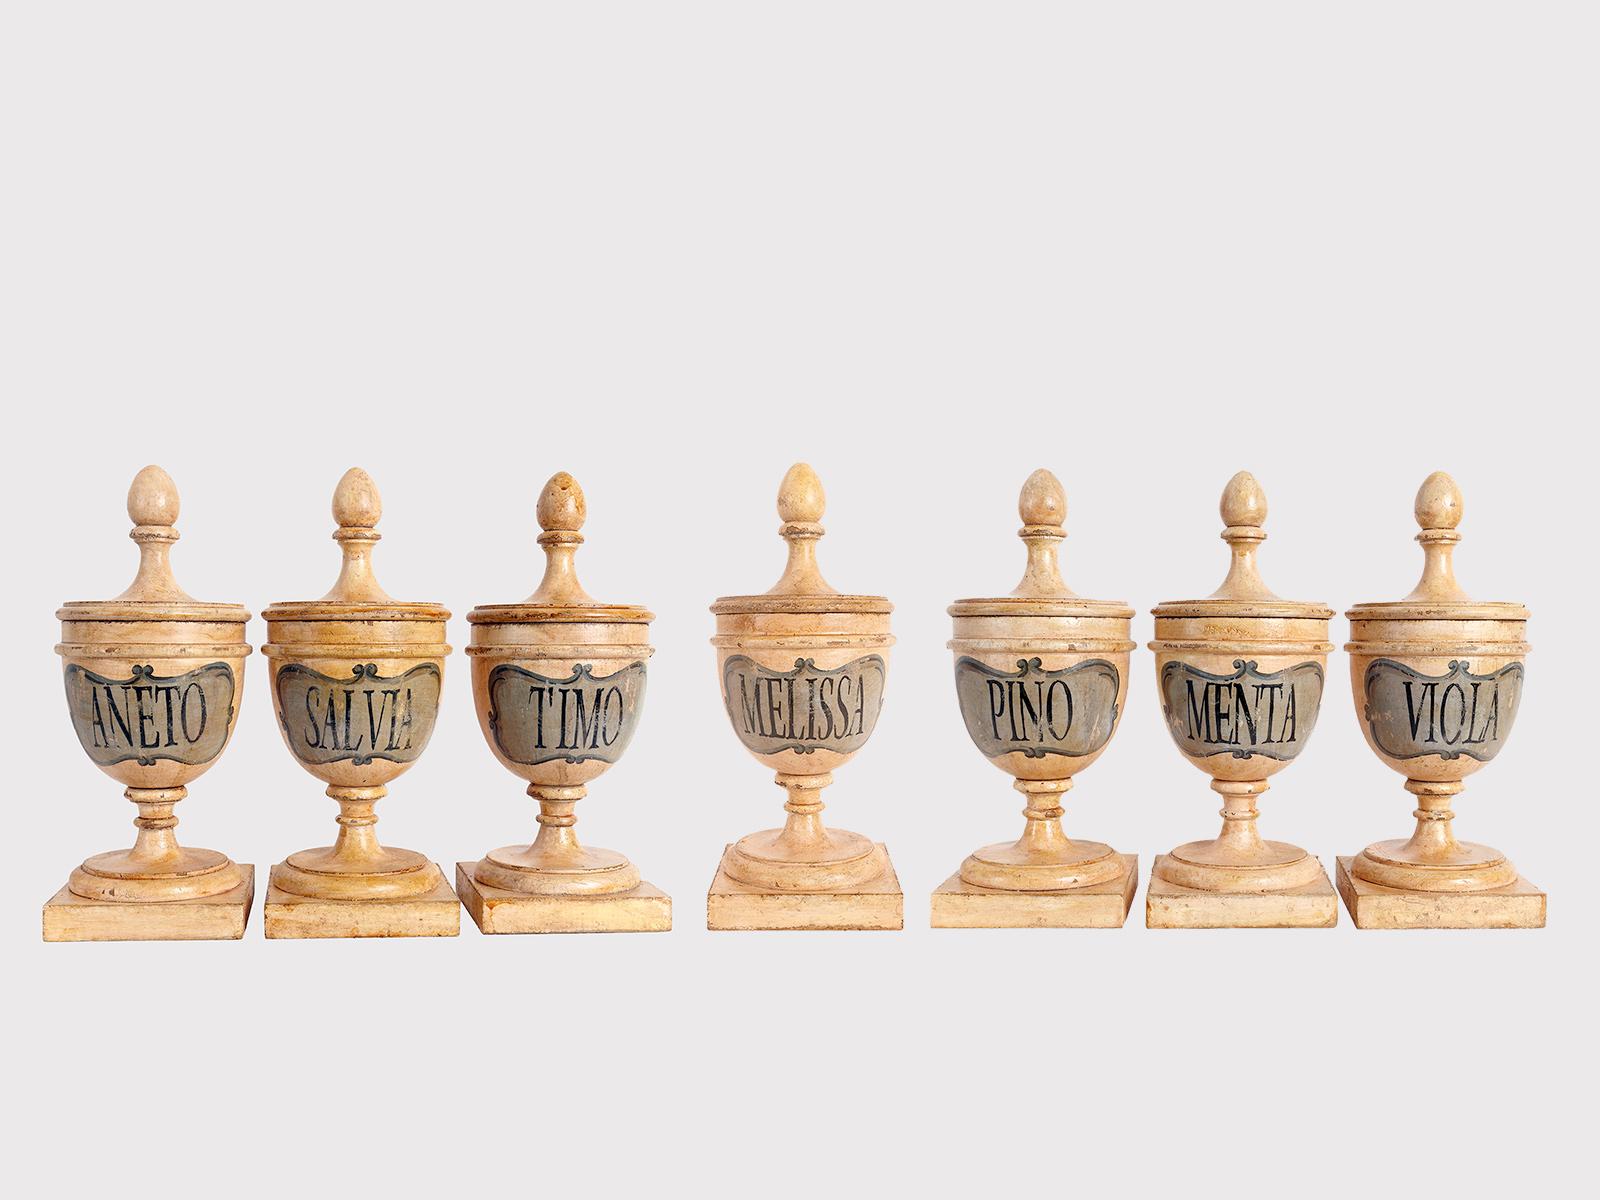 Set of seven medium-sized fruitwooden pharmacy-herbal jars (Pine, Mint, Viola, Melissa, Dill, Sage, Thyme) in the purest neoclassical style. The surface is finished with a white pad with a blue scroll decoration, the names of the herbs in black.